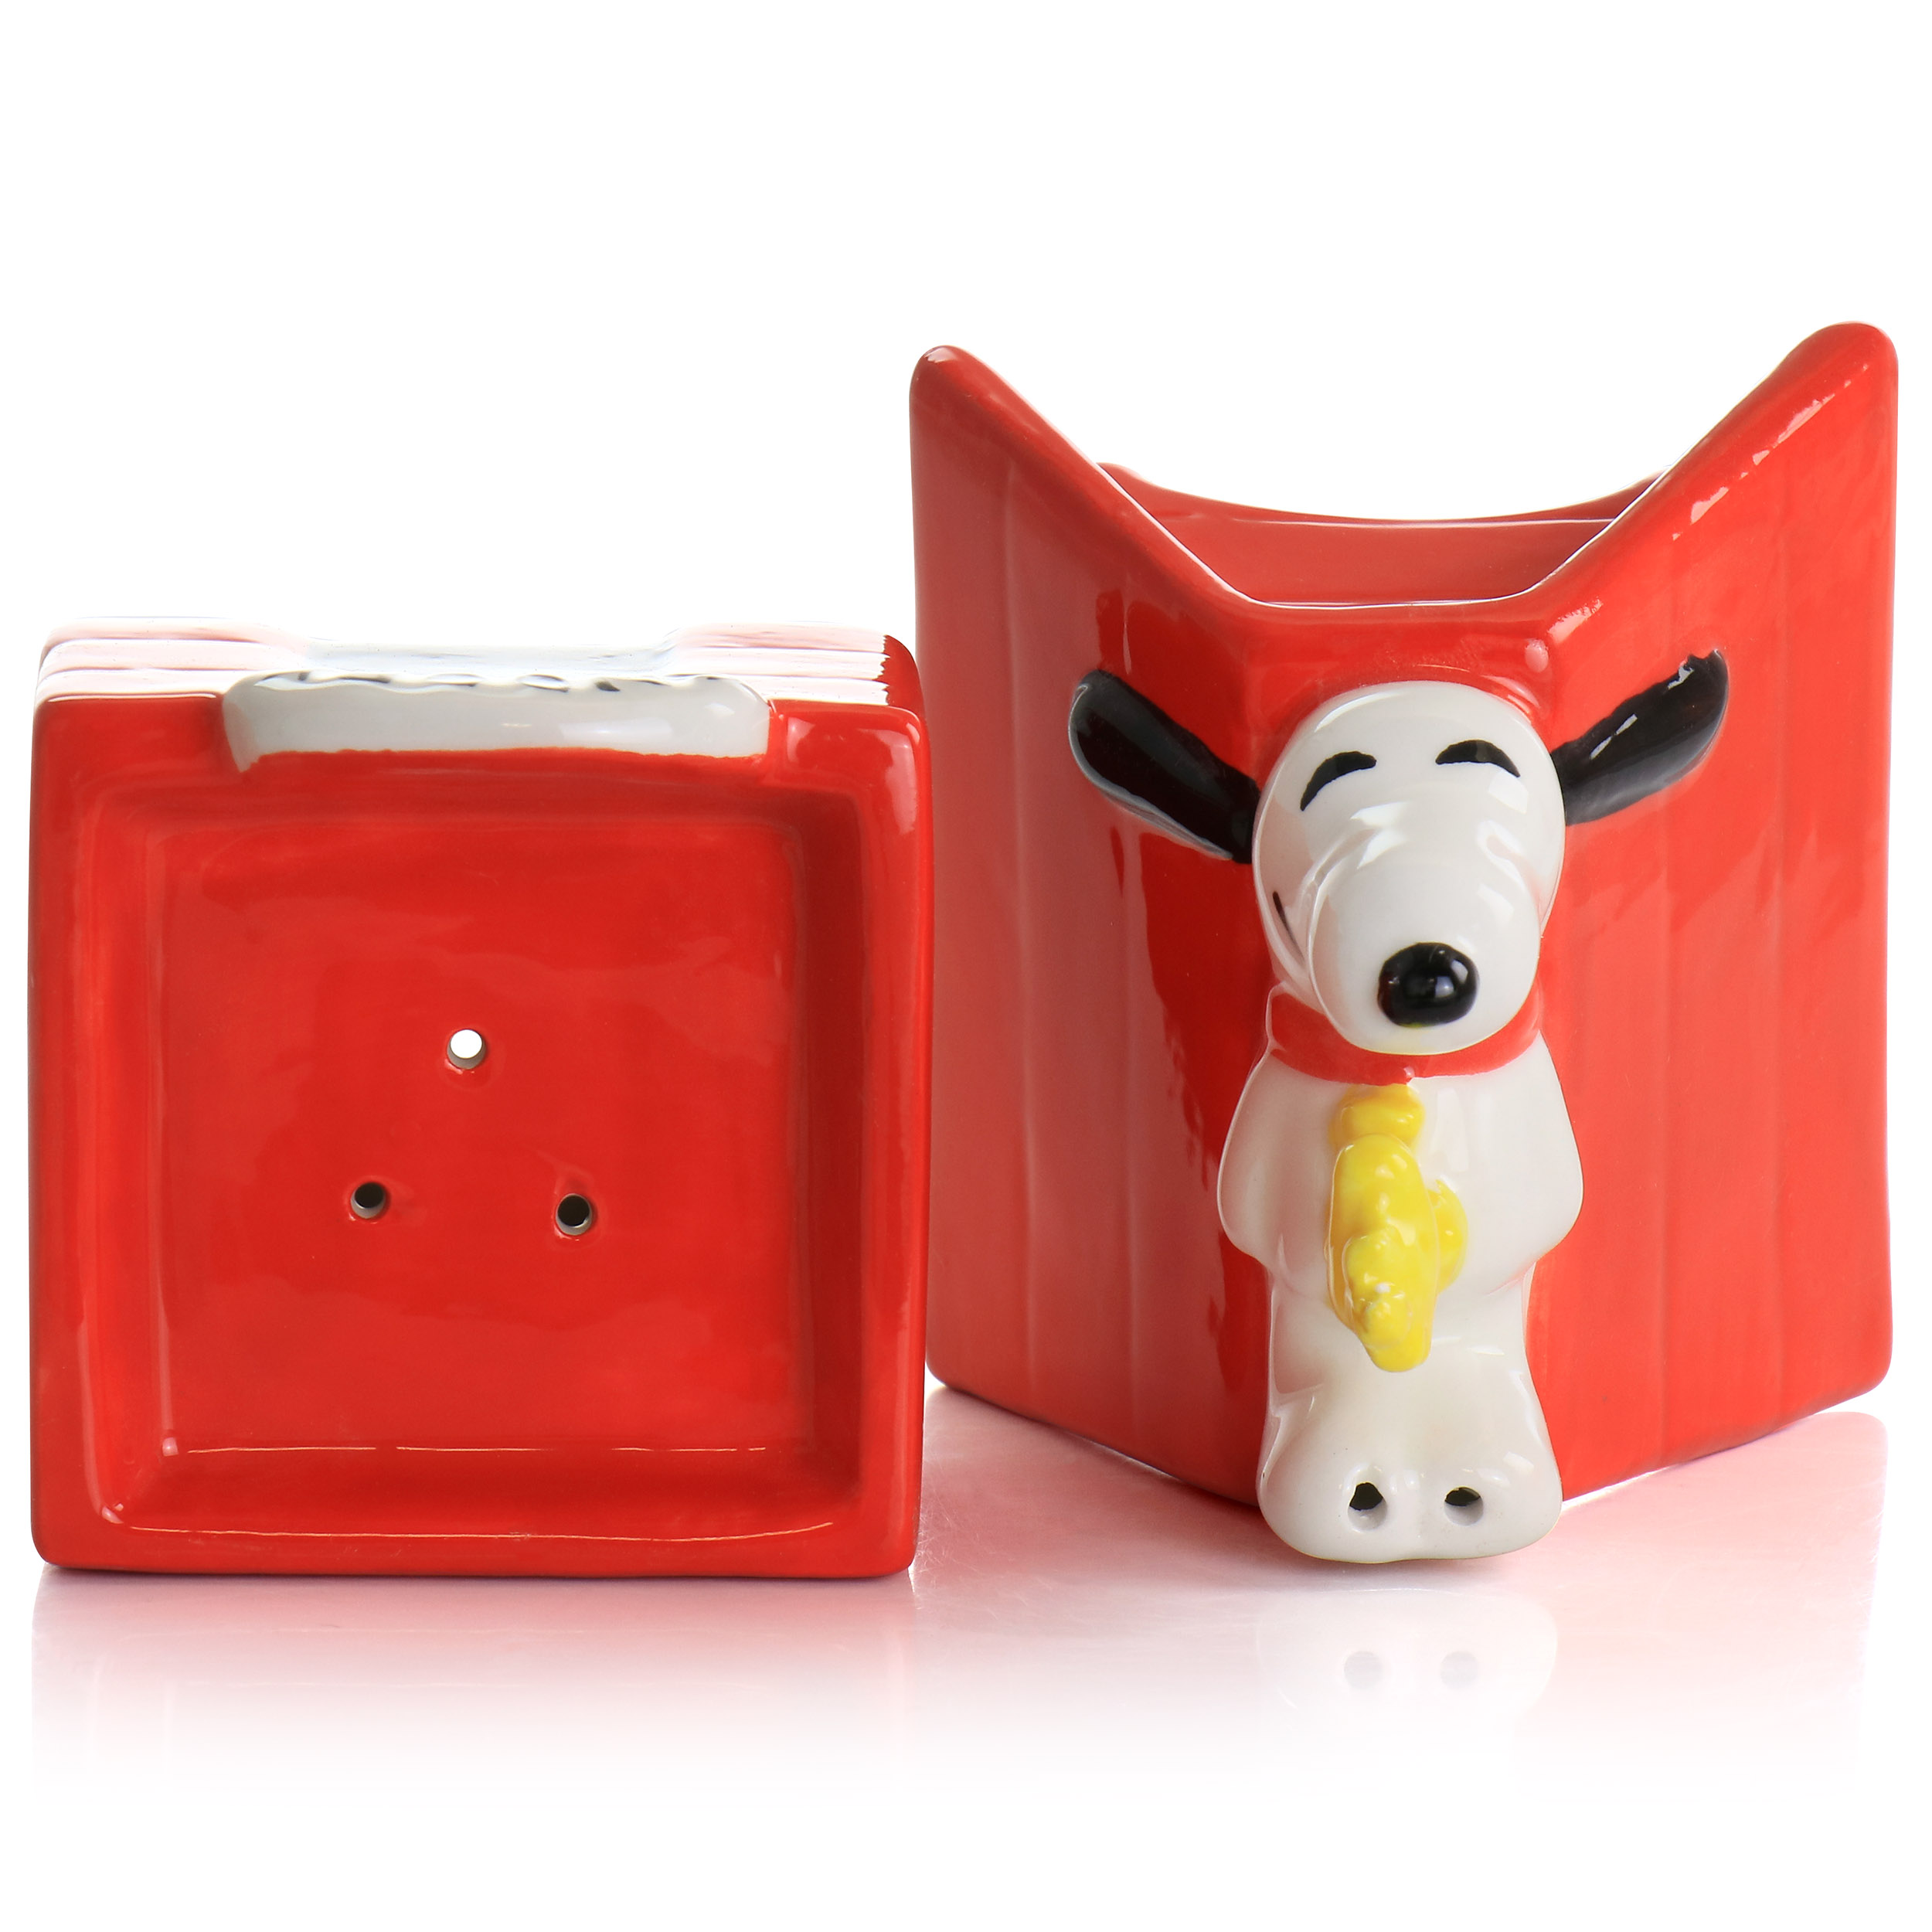 Peanuts By Schulz Peanuts Classical Dog House Snoopy and Woodstock Salt and Pepper Shaker Set